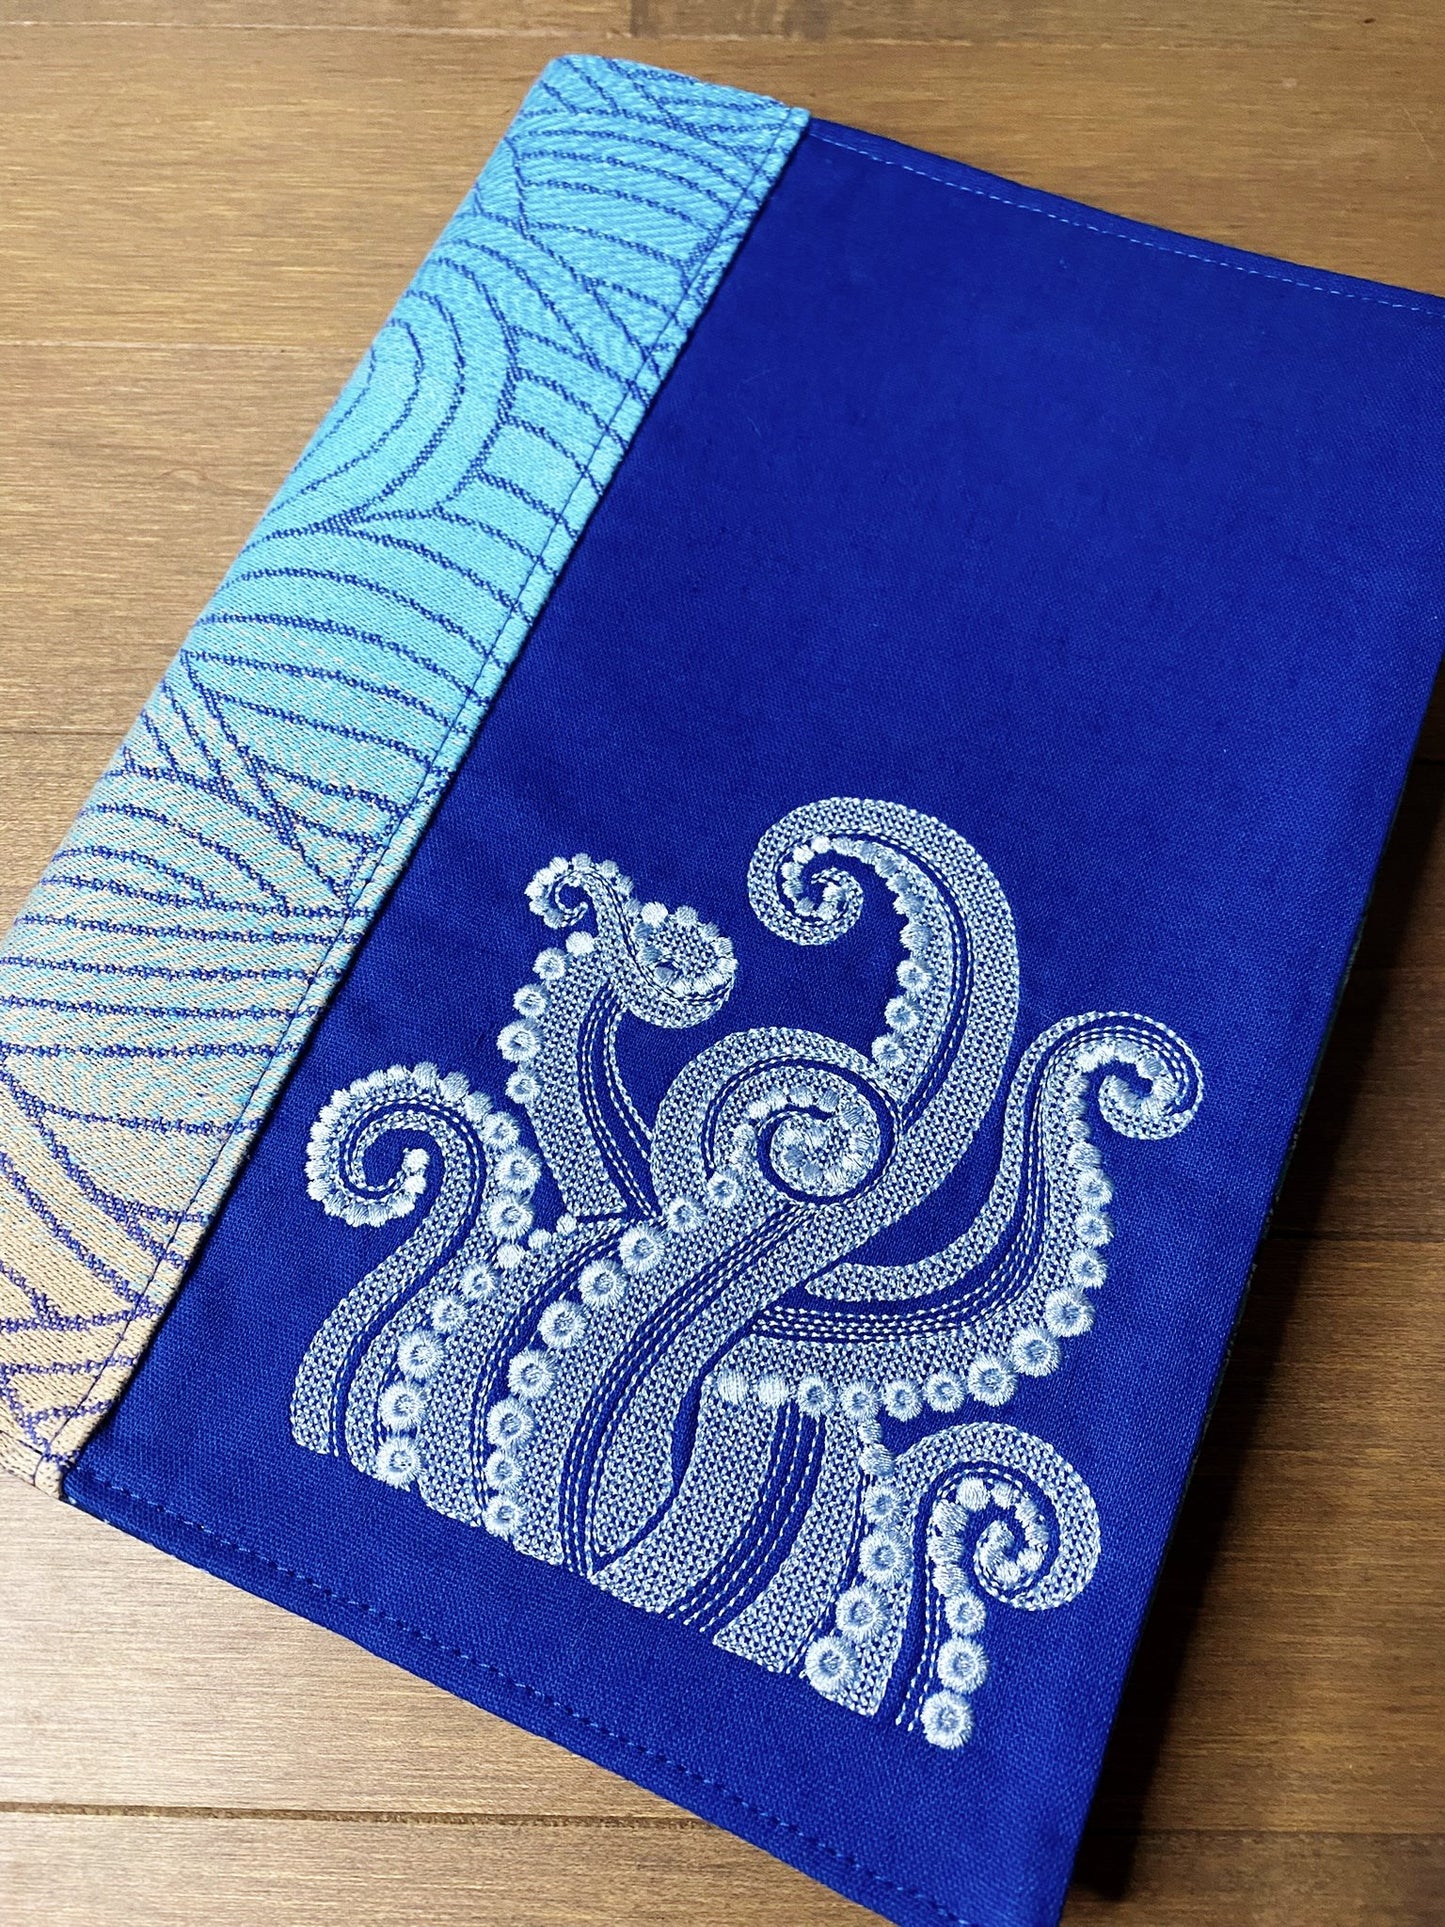 Opulent Octopus Journal and Notebook Cover